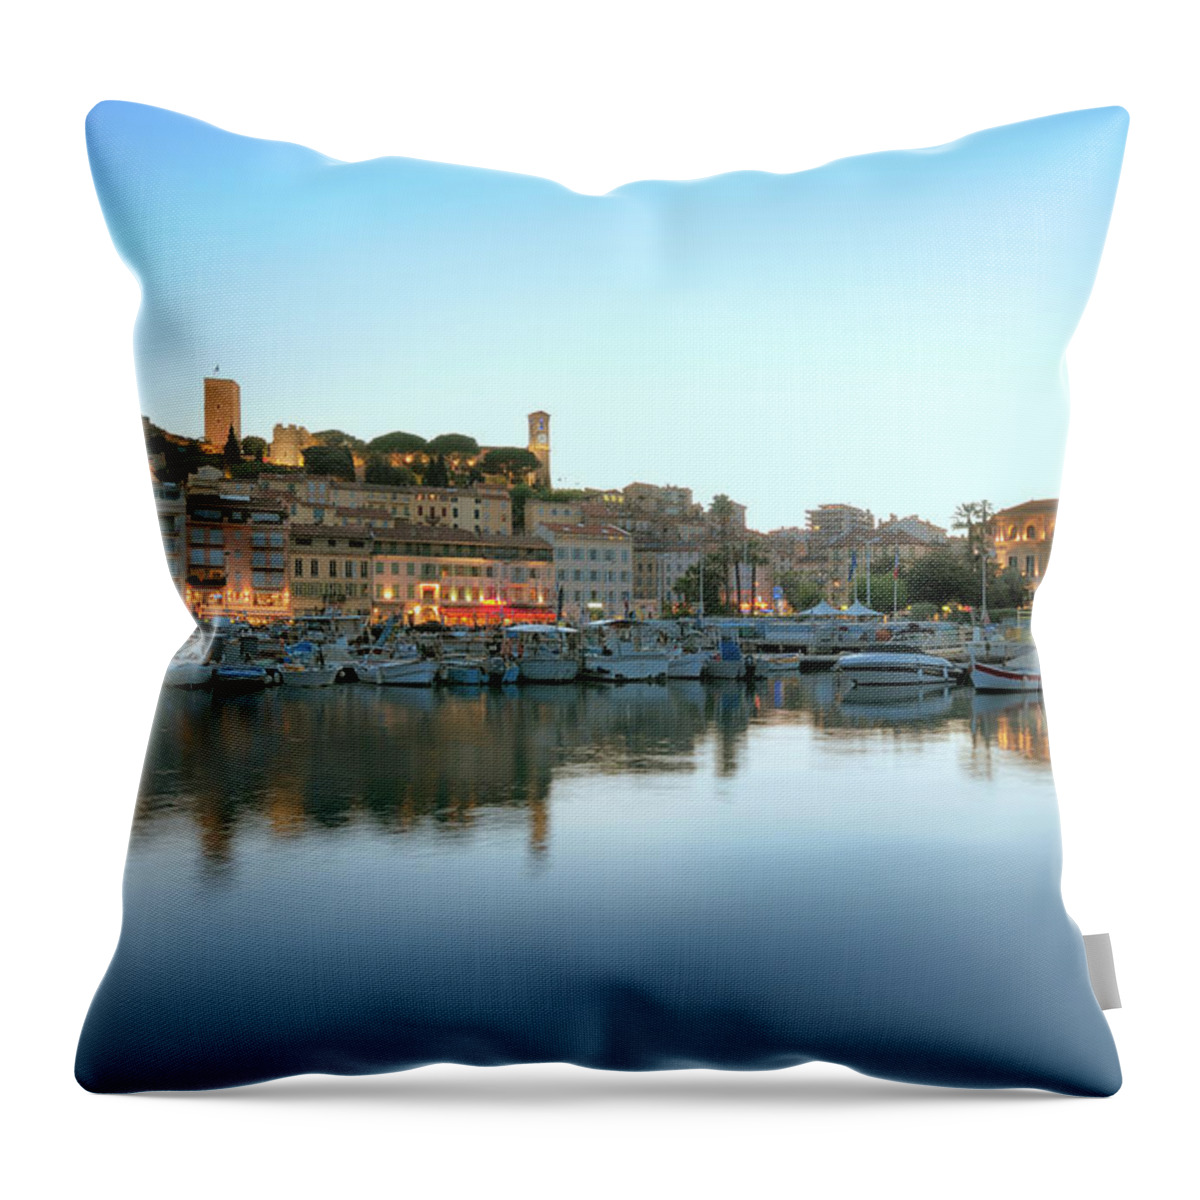 Water's Edge Throw Pillow featuring the photograph Cannes In The Evening Viewed From Harbor by Nikitje